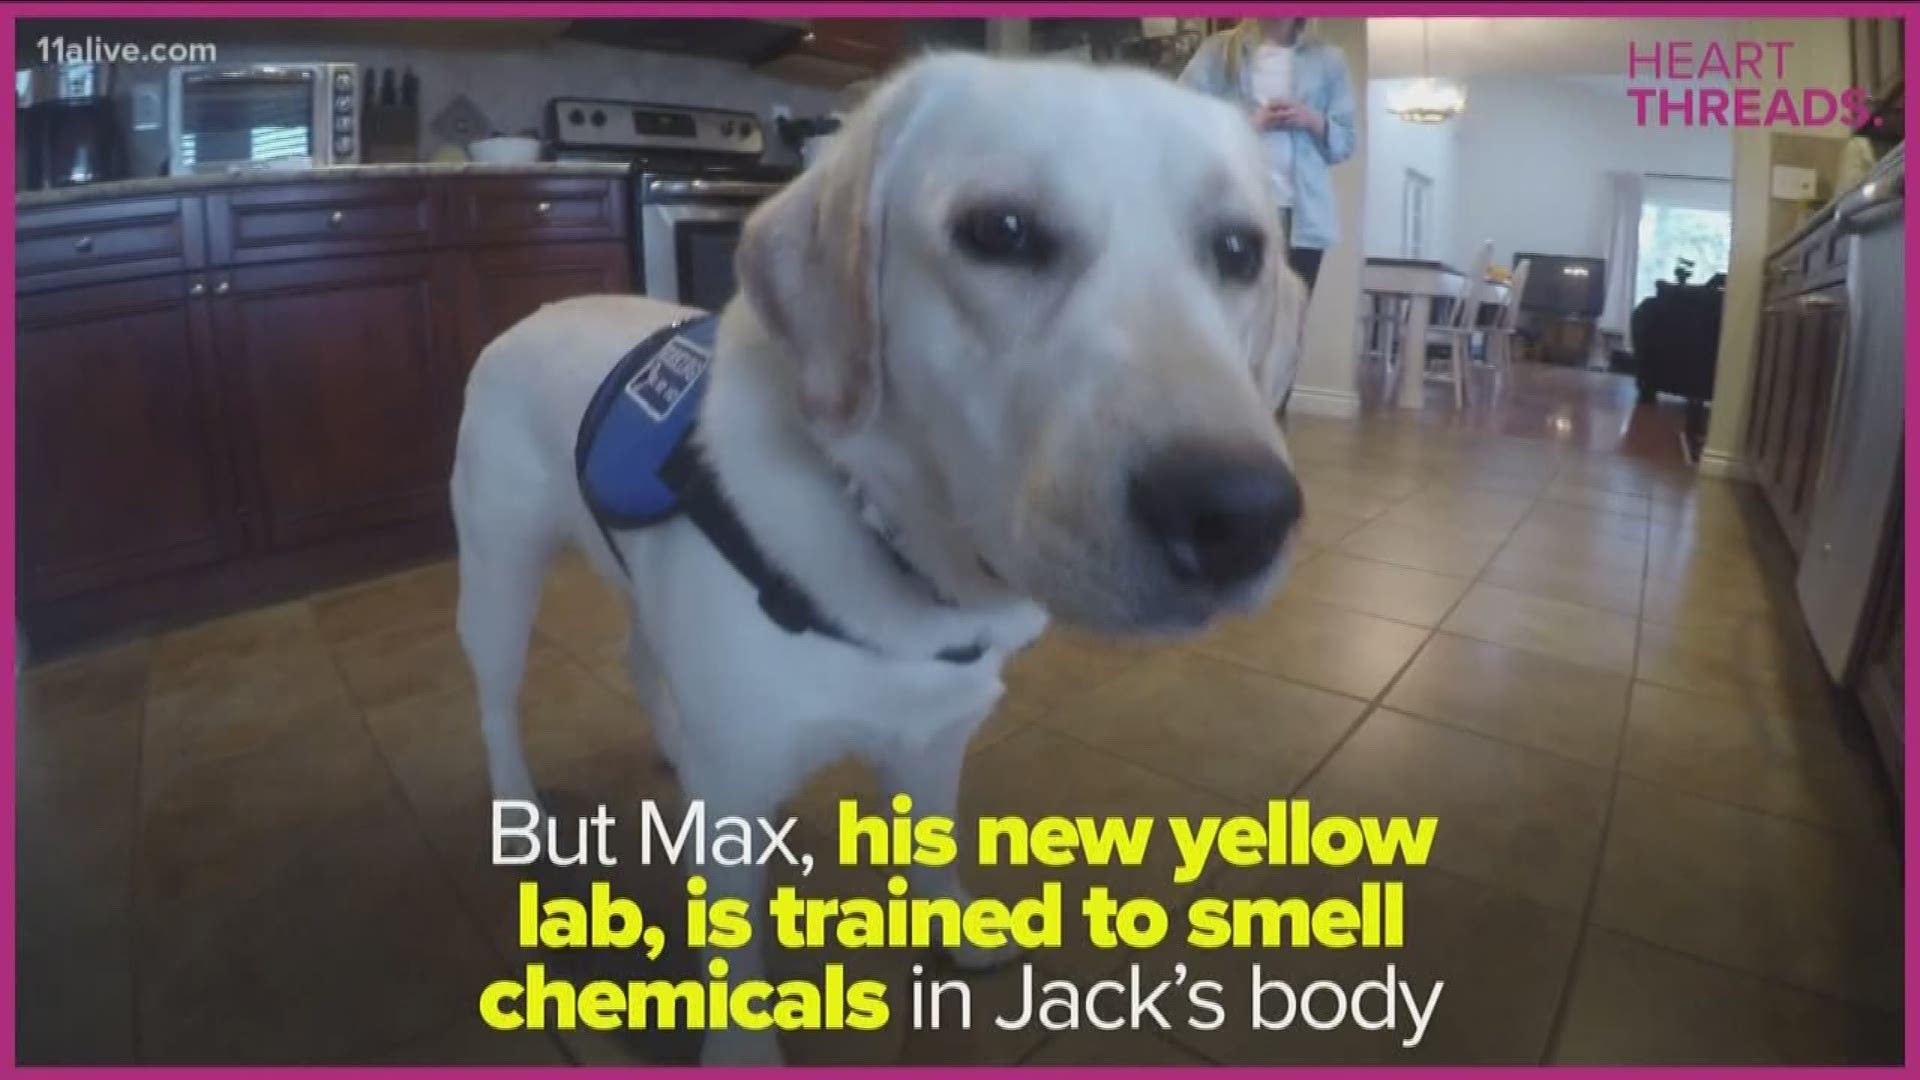 Jack's family didn't think they would be able to raise the $15,000 to get the dog.